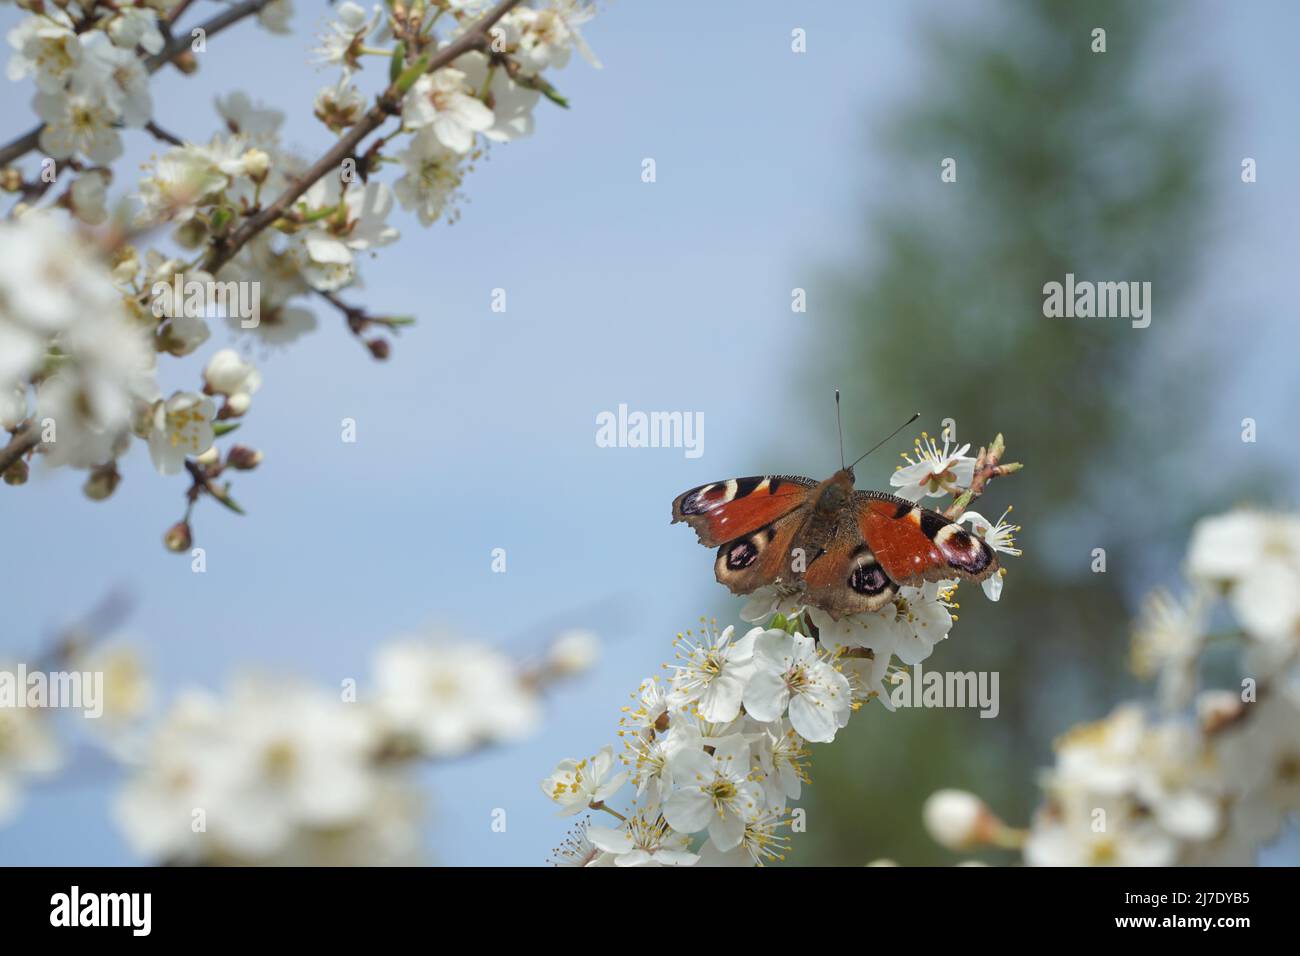 Butterfly European peacock (Aglais io), commonly known  as the peacock butterfly, a spring butterfly between the white flowers of a blooming pear tree. Stock Photo